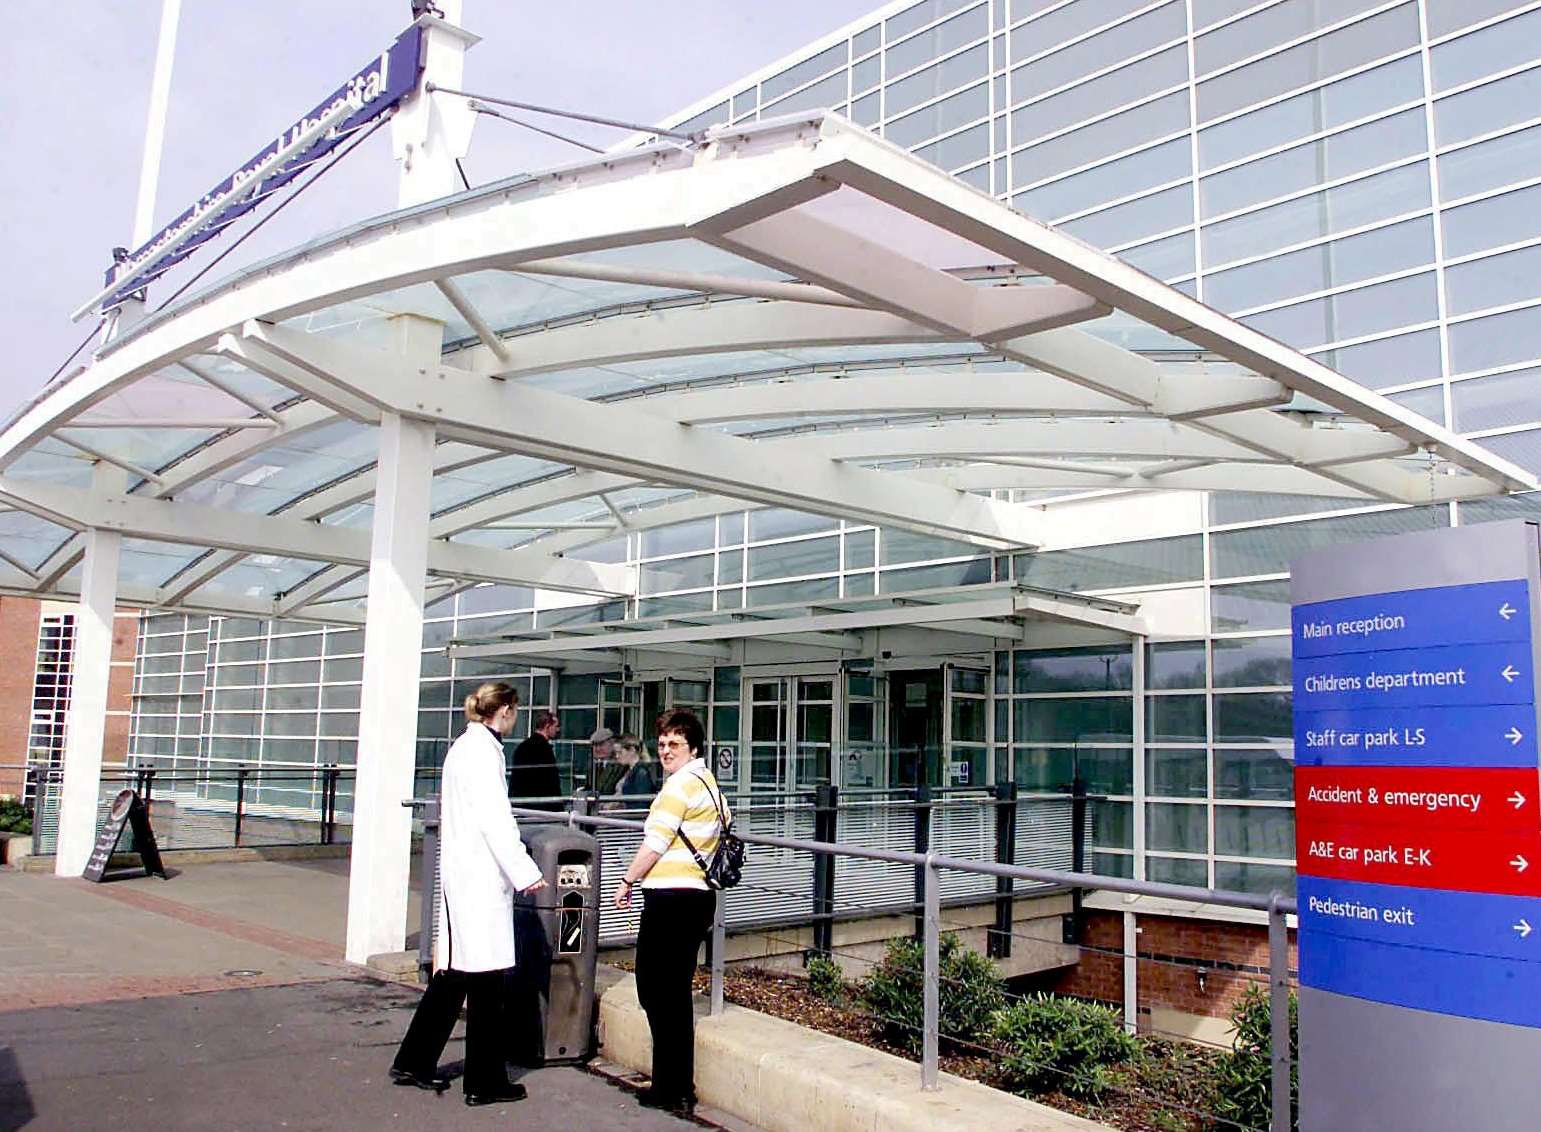 Alexandra Hospital in Redditch, Worcestershire. Picture: Picture: SWNS.com